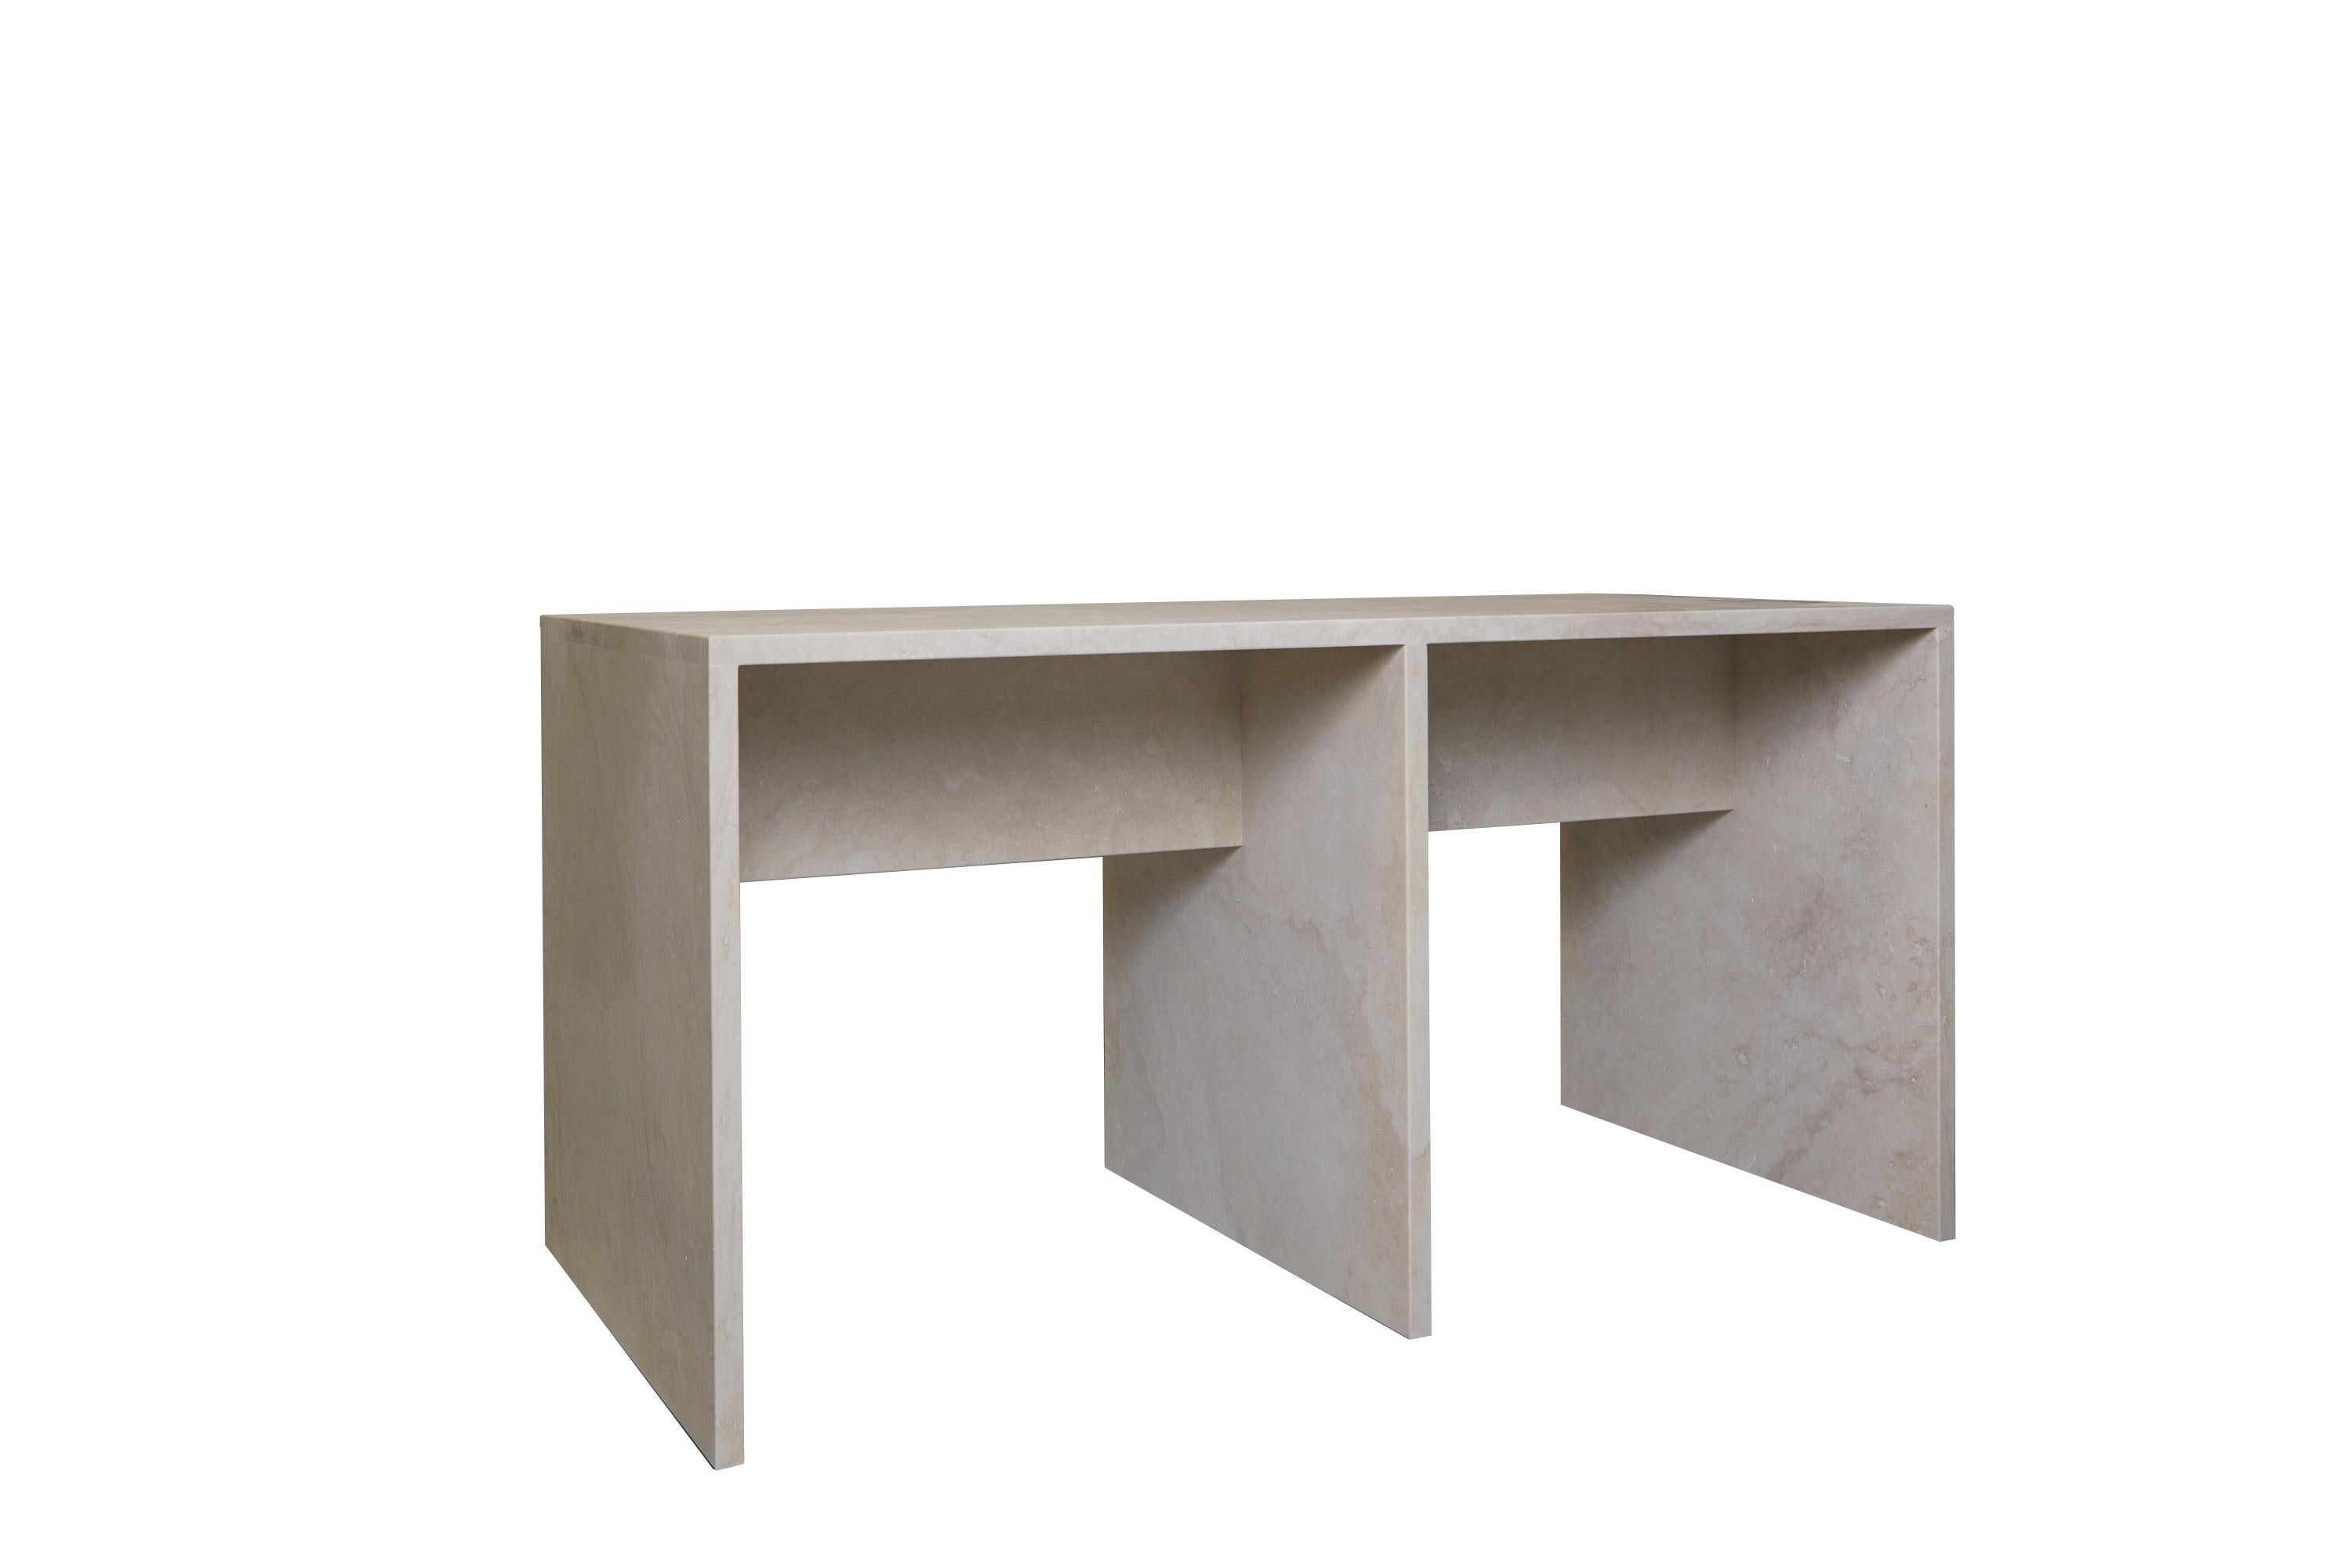 Meticulously and simply crafted with solid travertine slabs, the proportions create a lightness of form juxtaposing the materiality.

A continuation of Coffee Table Nº 106, this console is extruded to desk height with a cross beam for lateral